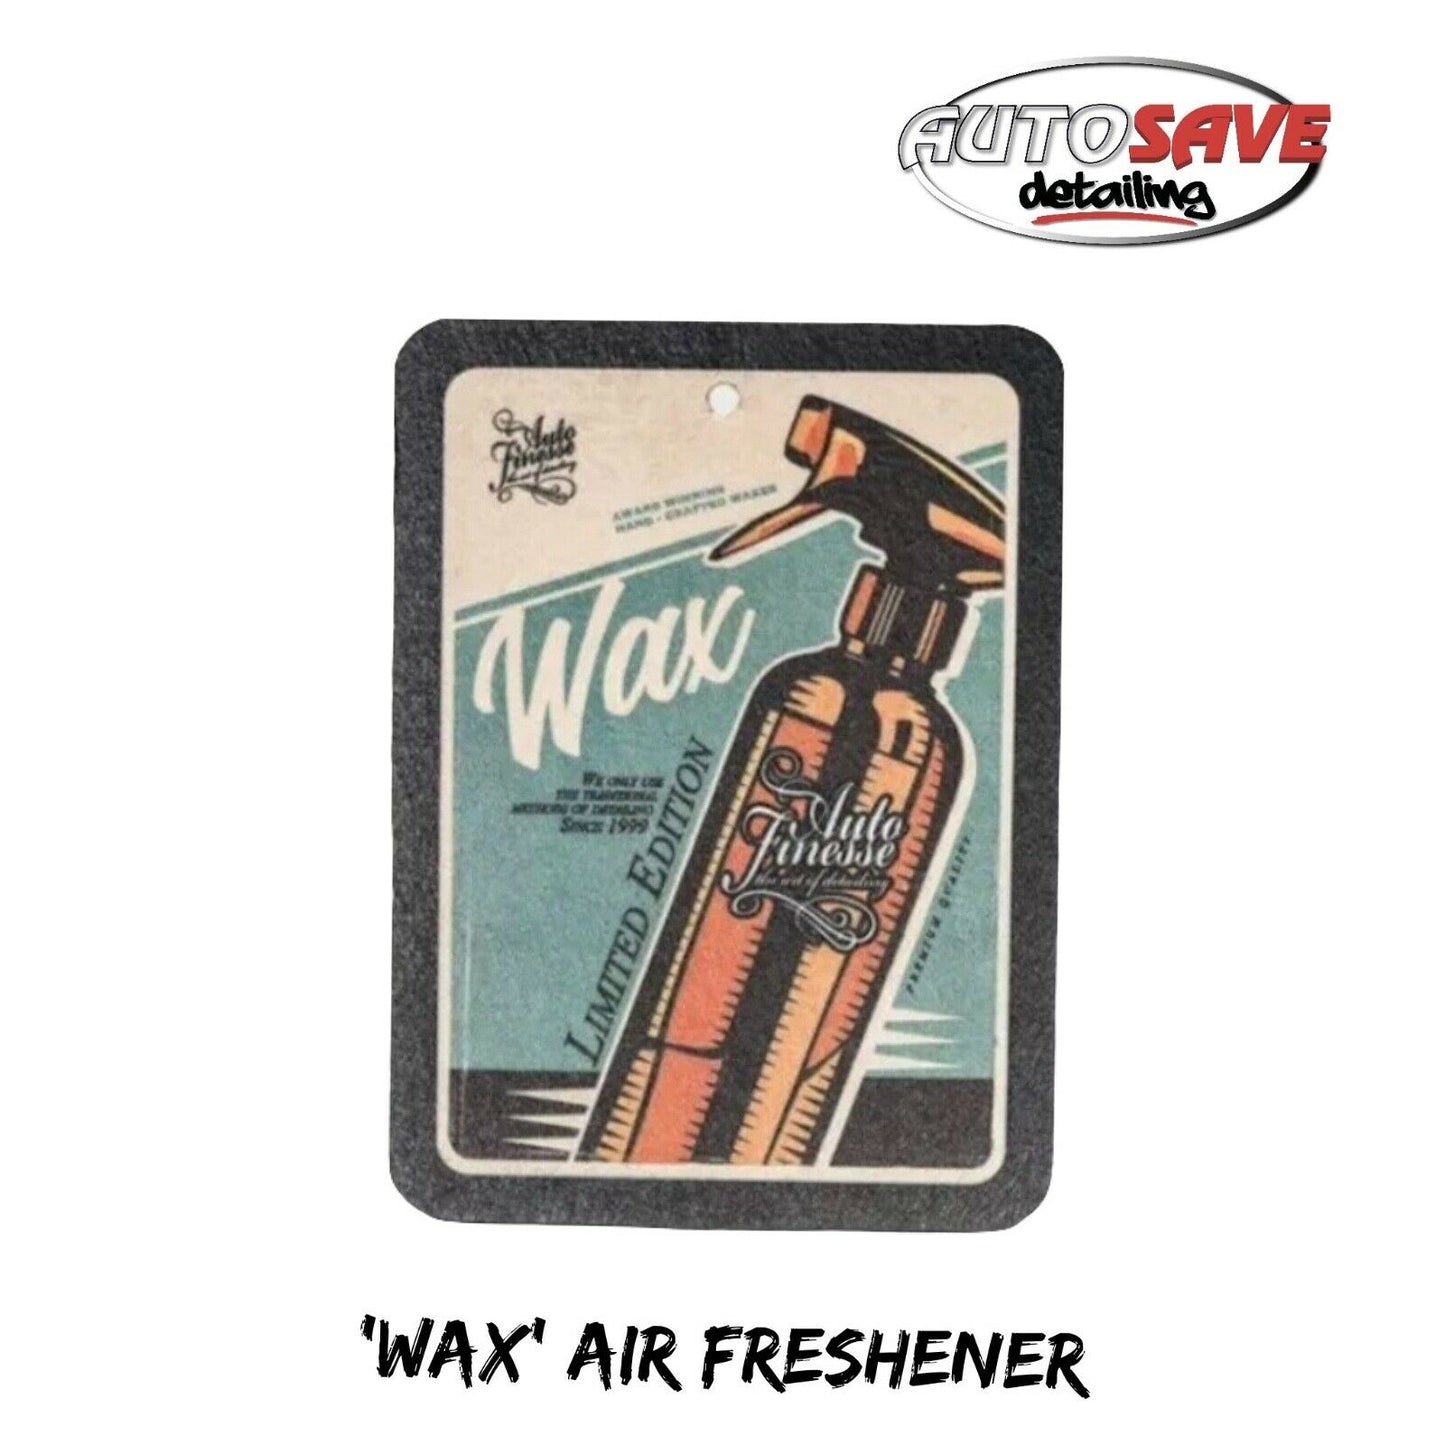 NEW - Limited Edition - Auto Finesse - Retro Air Freshener - Wax